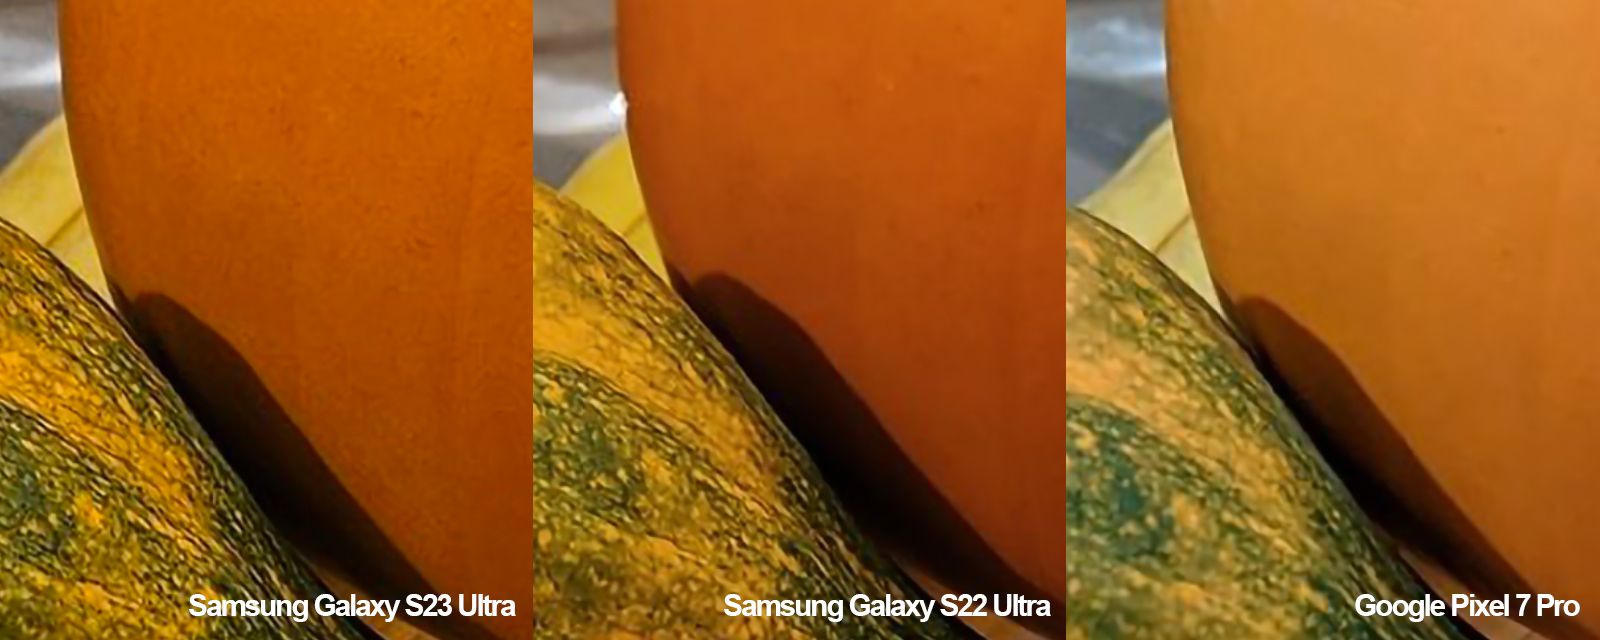 Samsung Galaxy S23 Ultra camera tested against S22 Ultra and Pixel 7 Pro photo 4